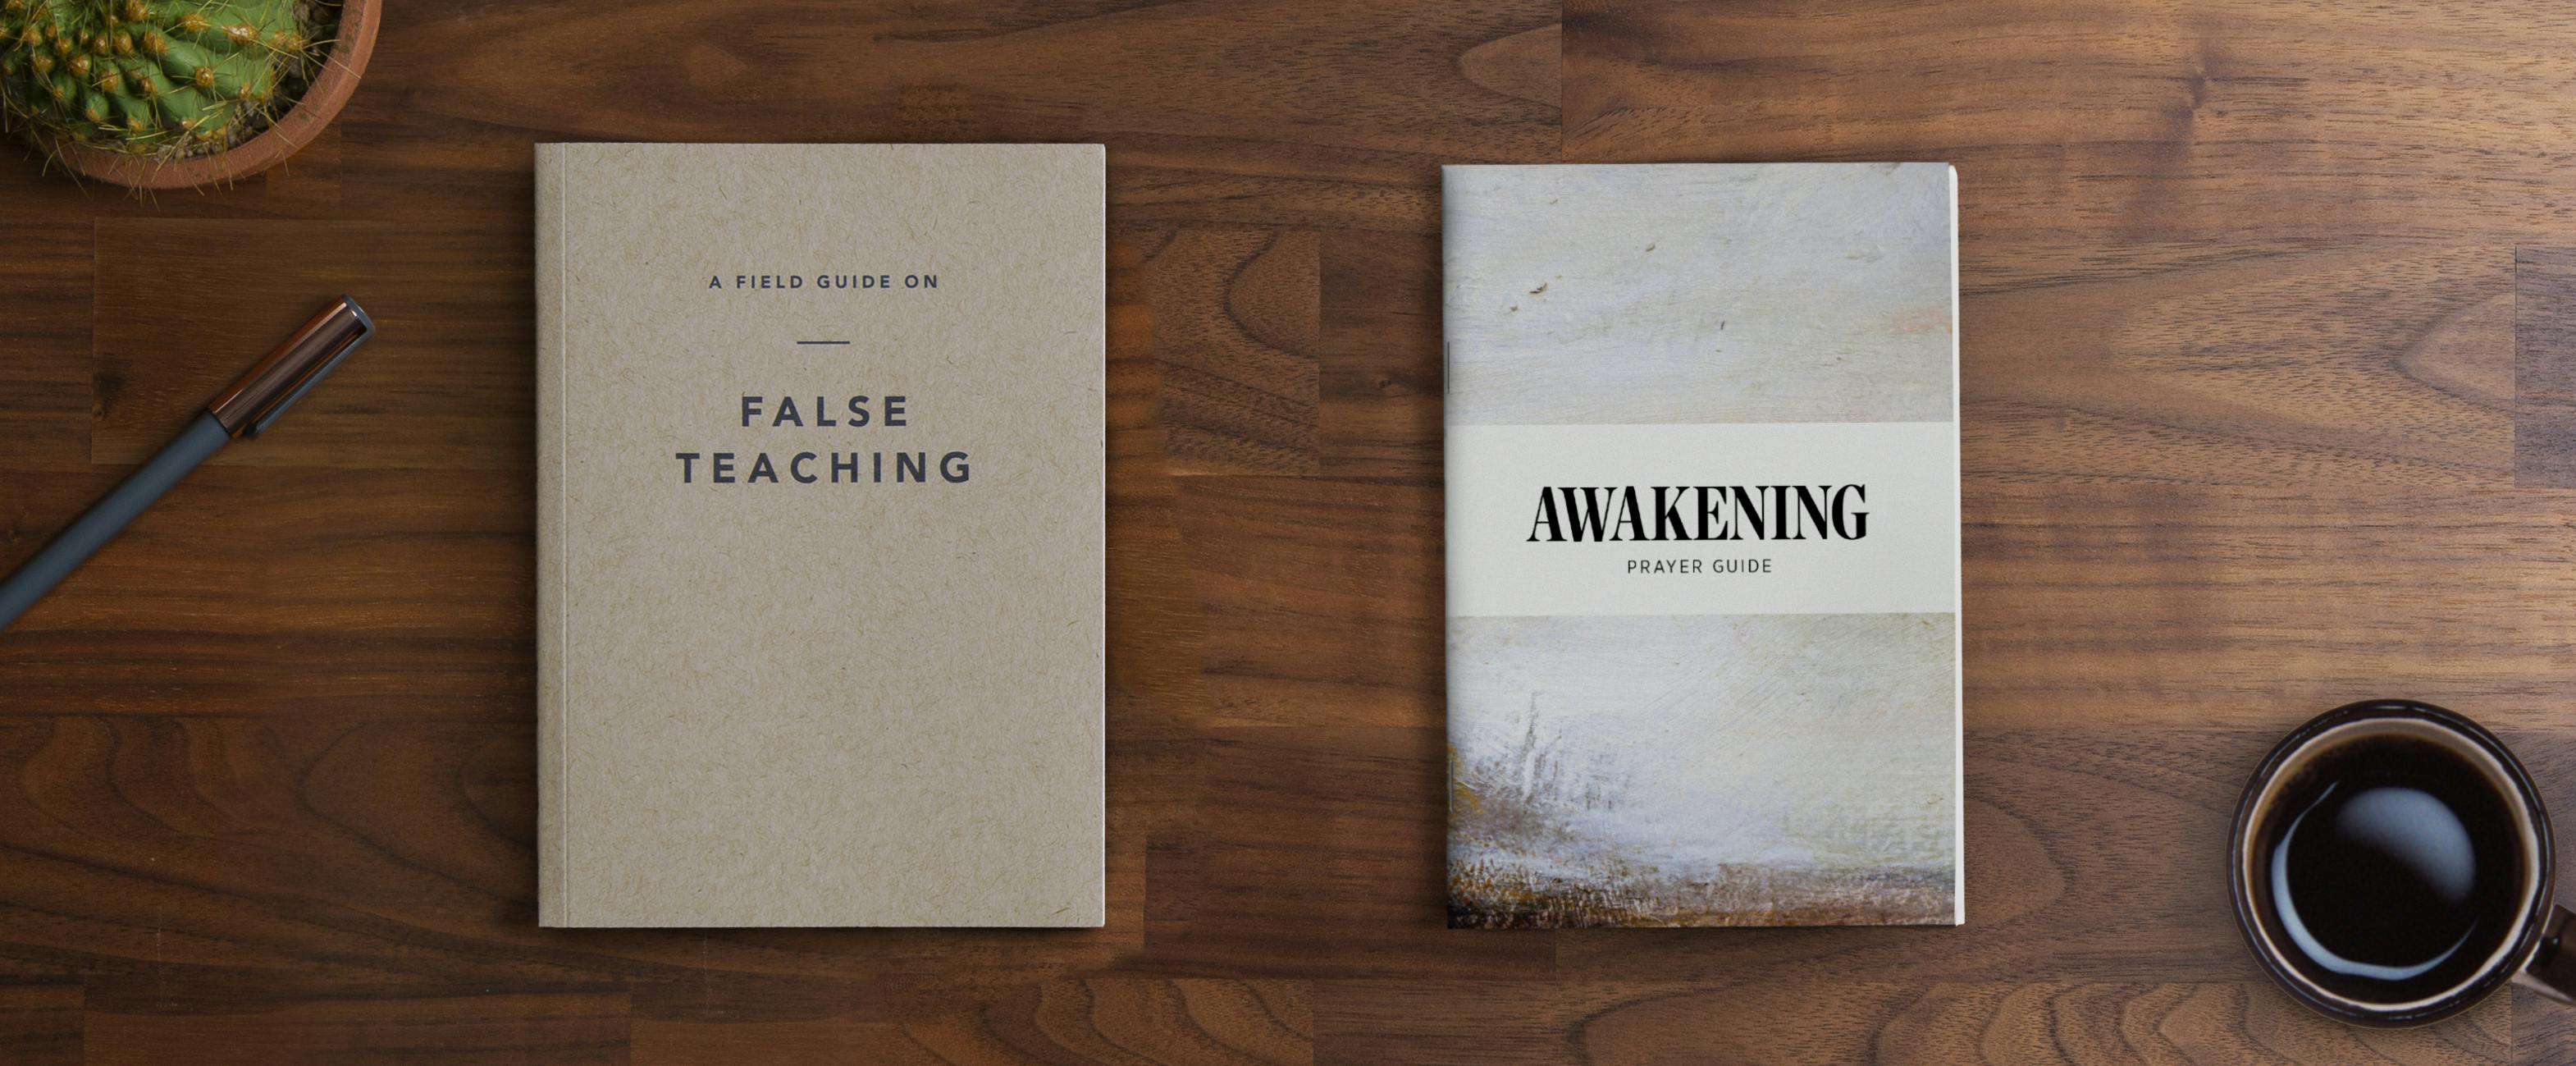 A Field Guide on False Teaching and Awakening Prayer Guide books on table